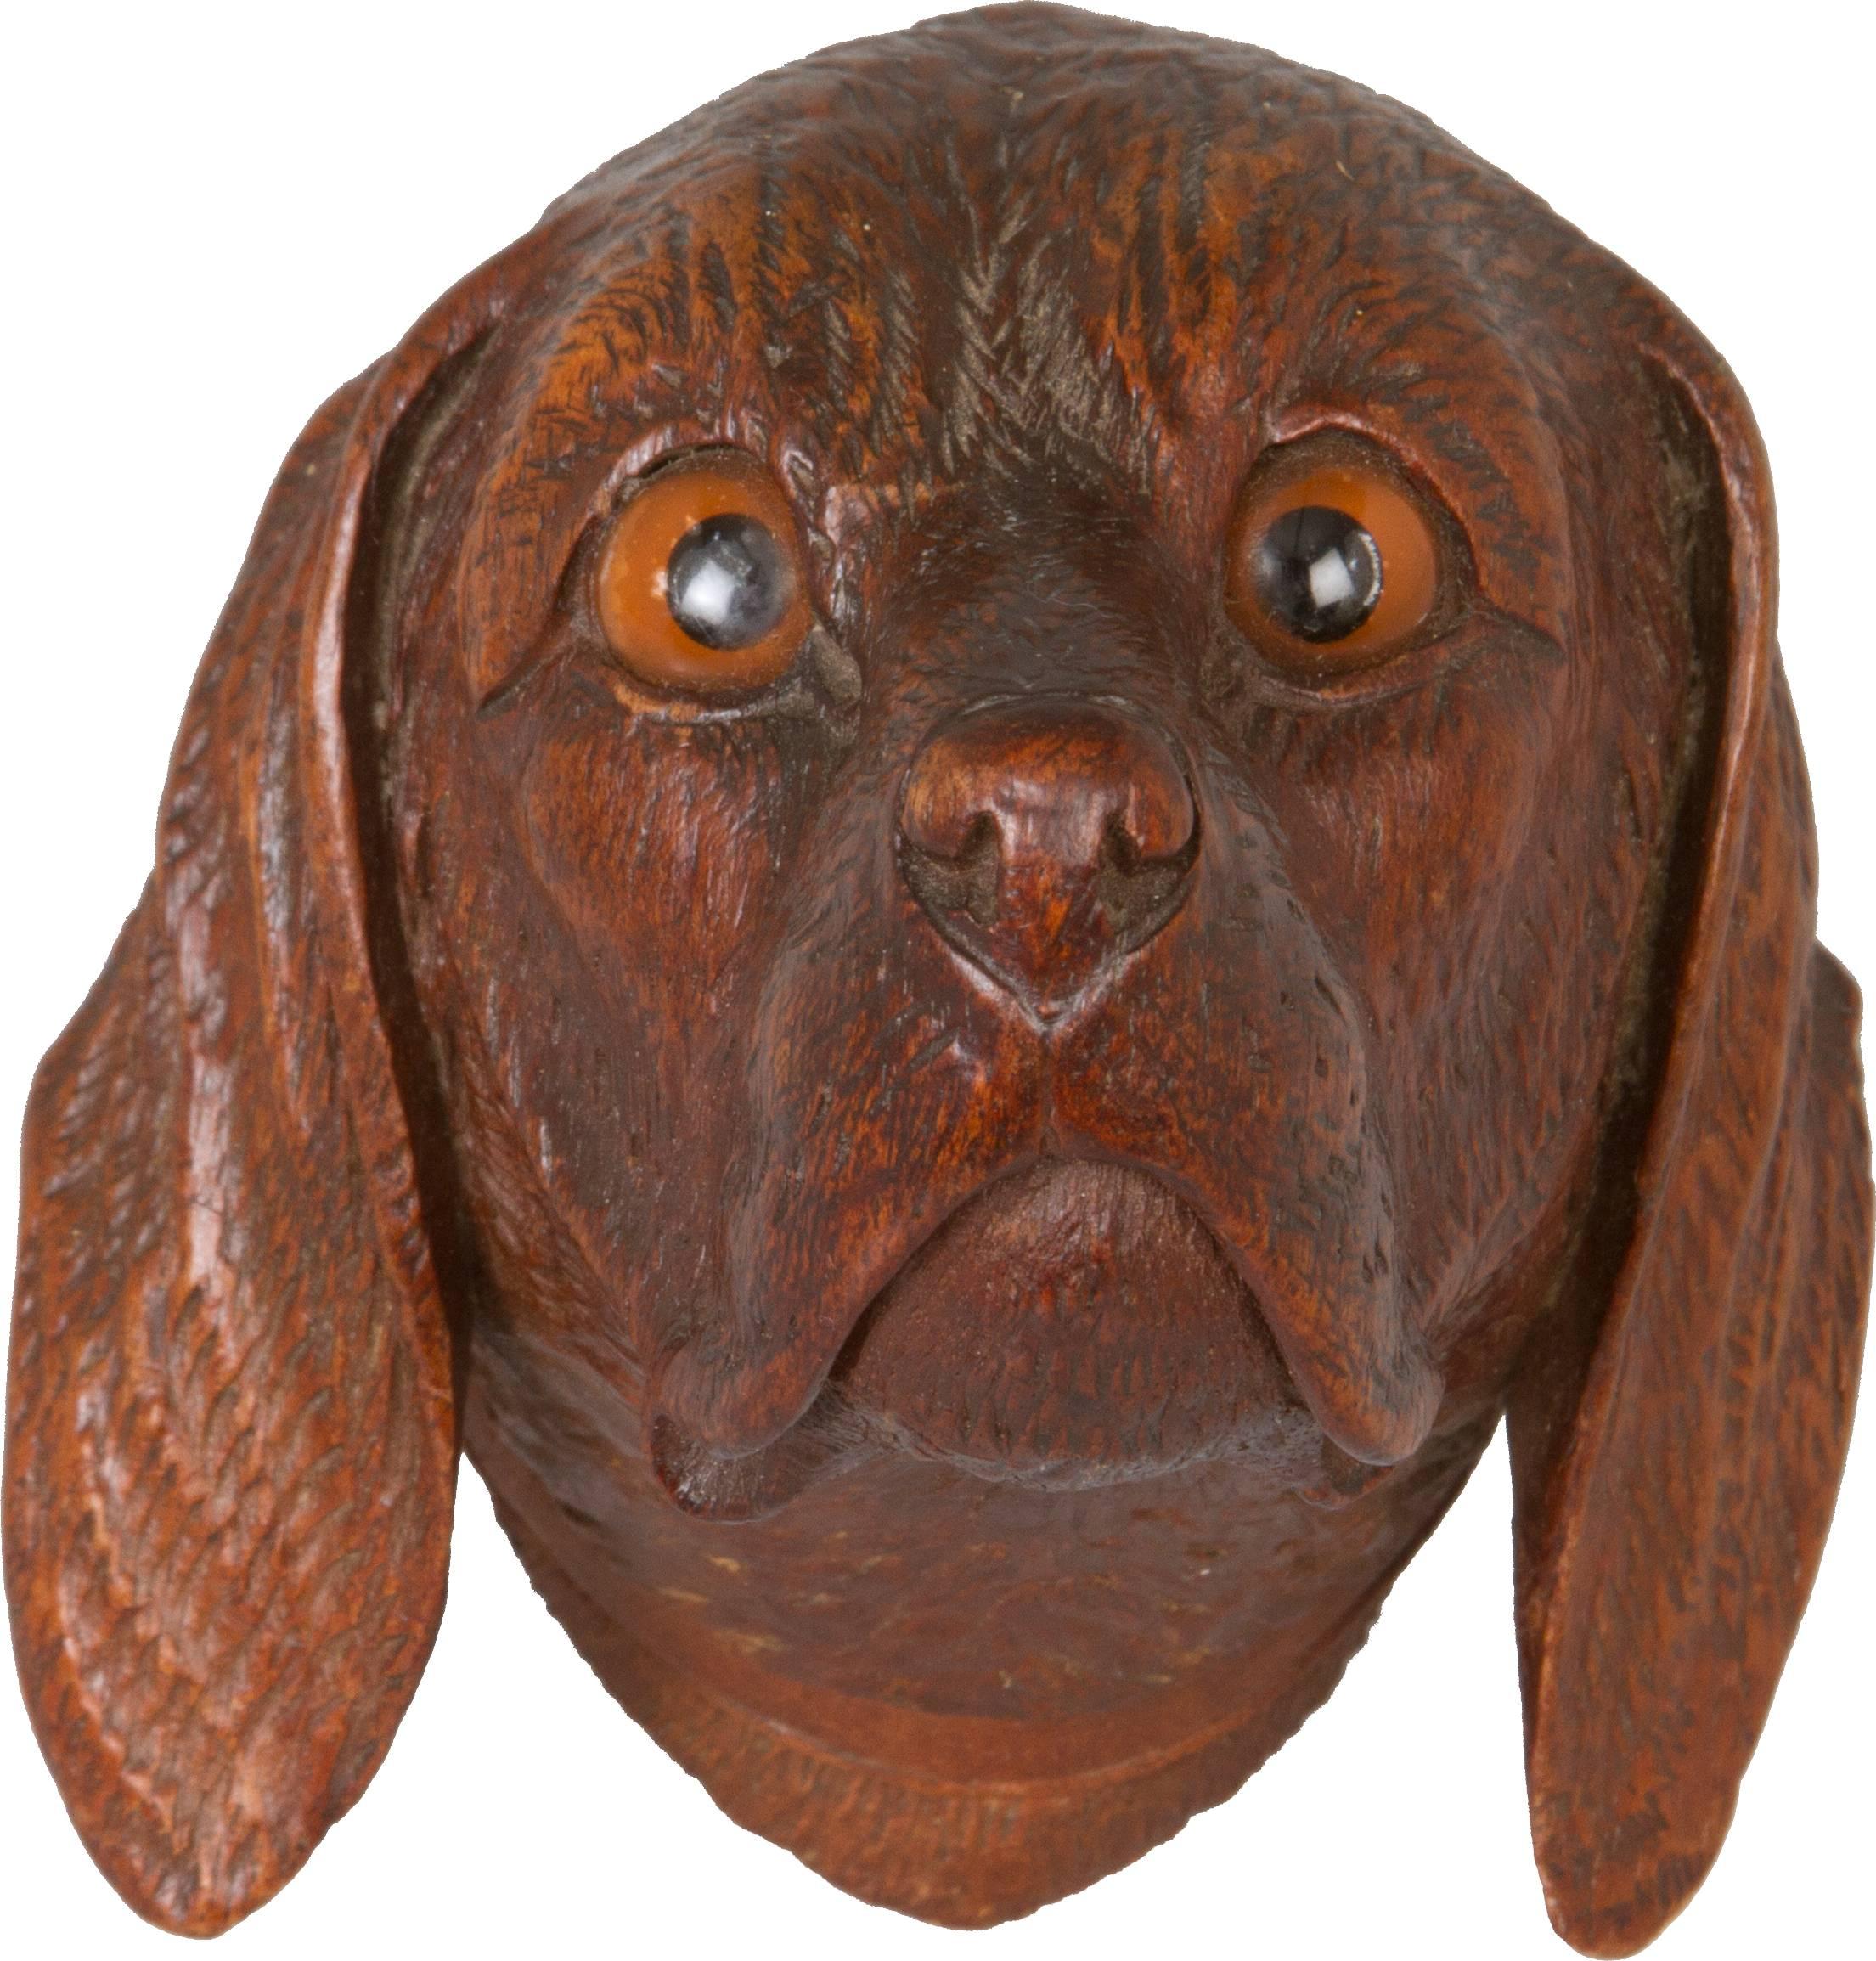 Beautifully carved this dog has amber colored glass eyes.